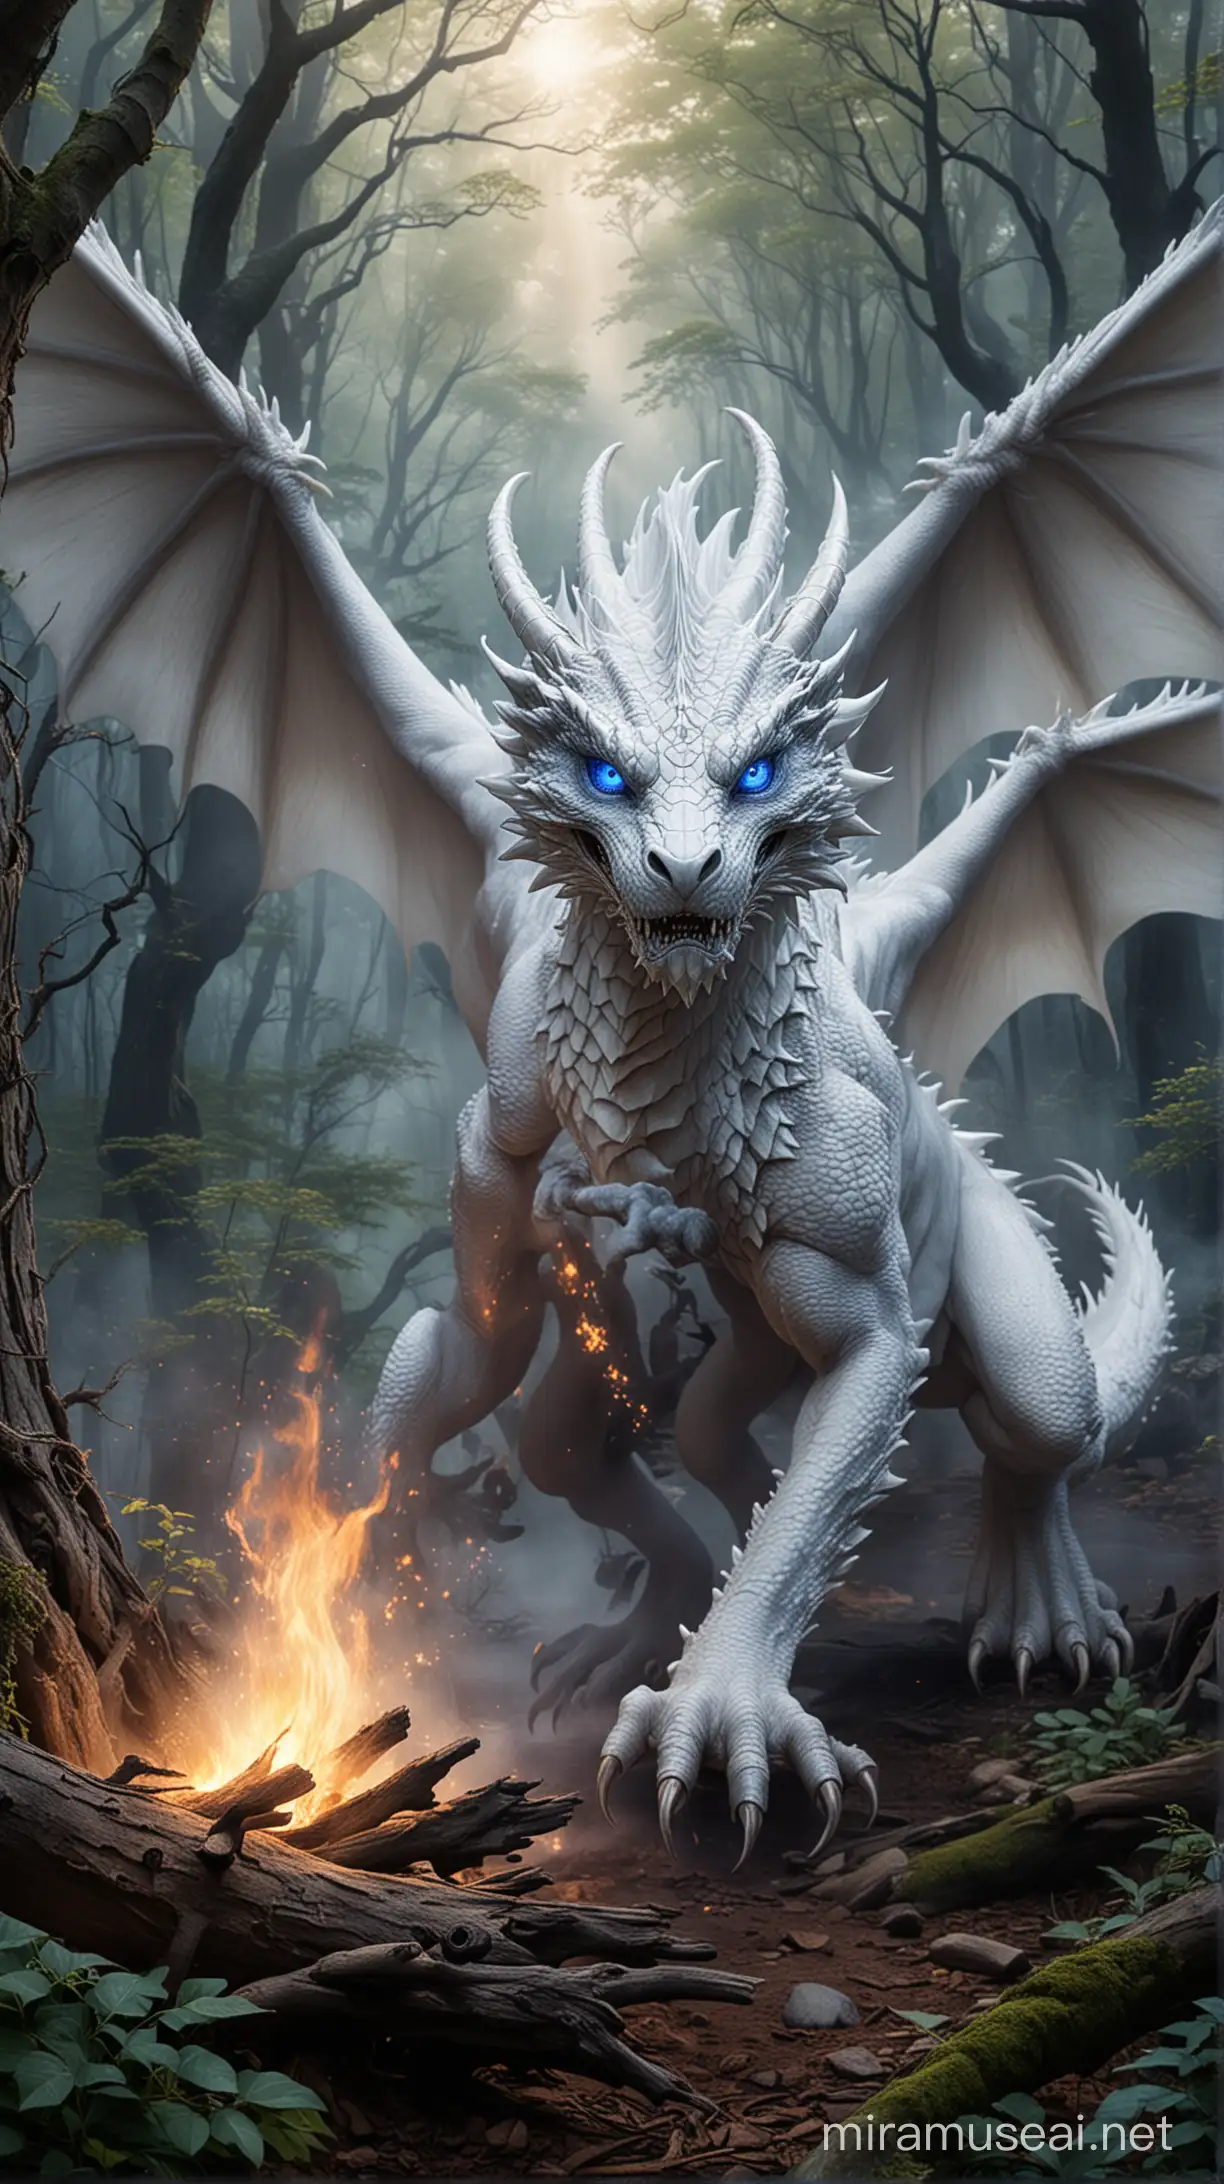 Mystic White Dragon with Indigo Eyes in Enchanted Forest